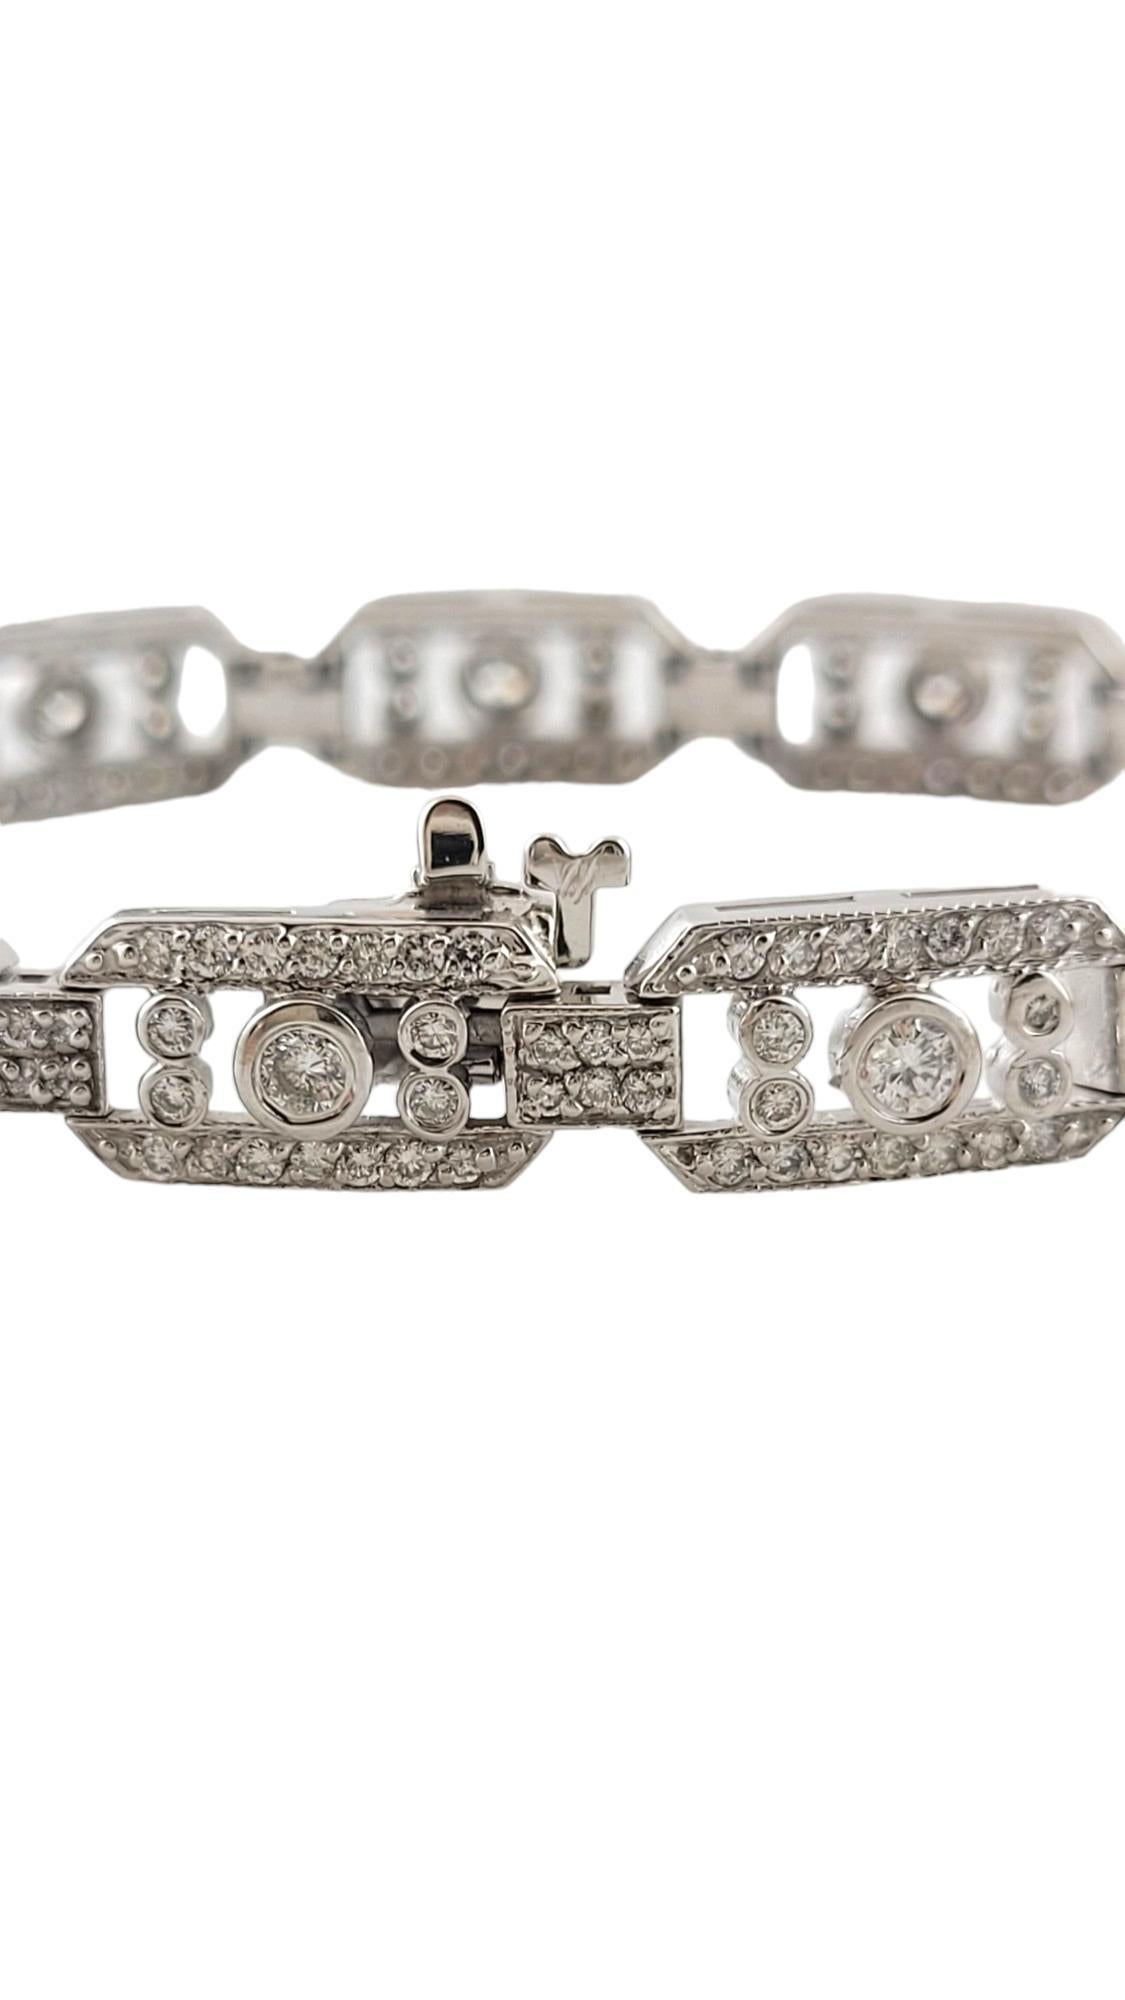 14 Karat White Gold and Diamond Link Bracelet #16952 In Good Condition For Sale In Washington Depot, CT